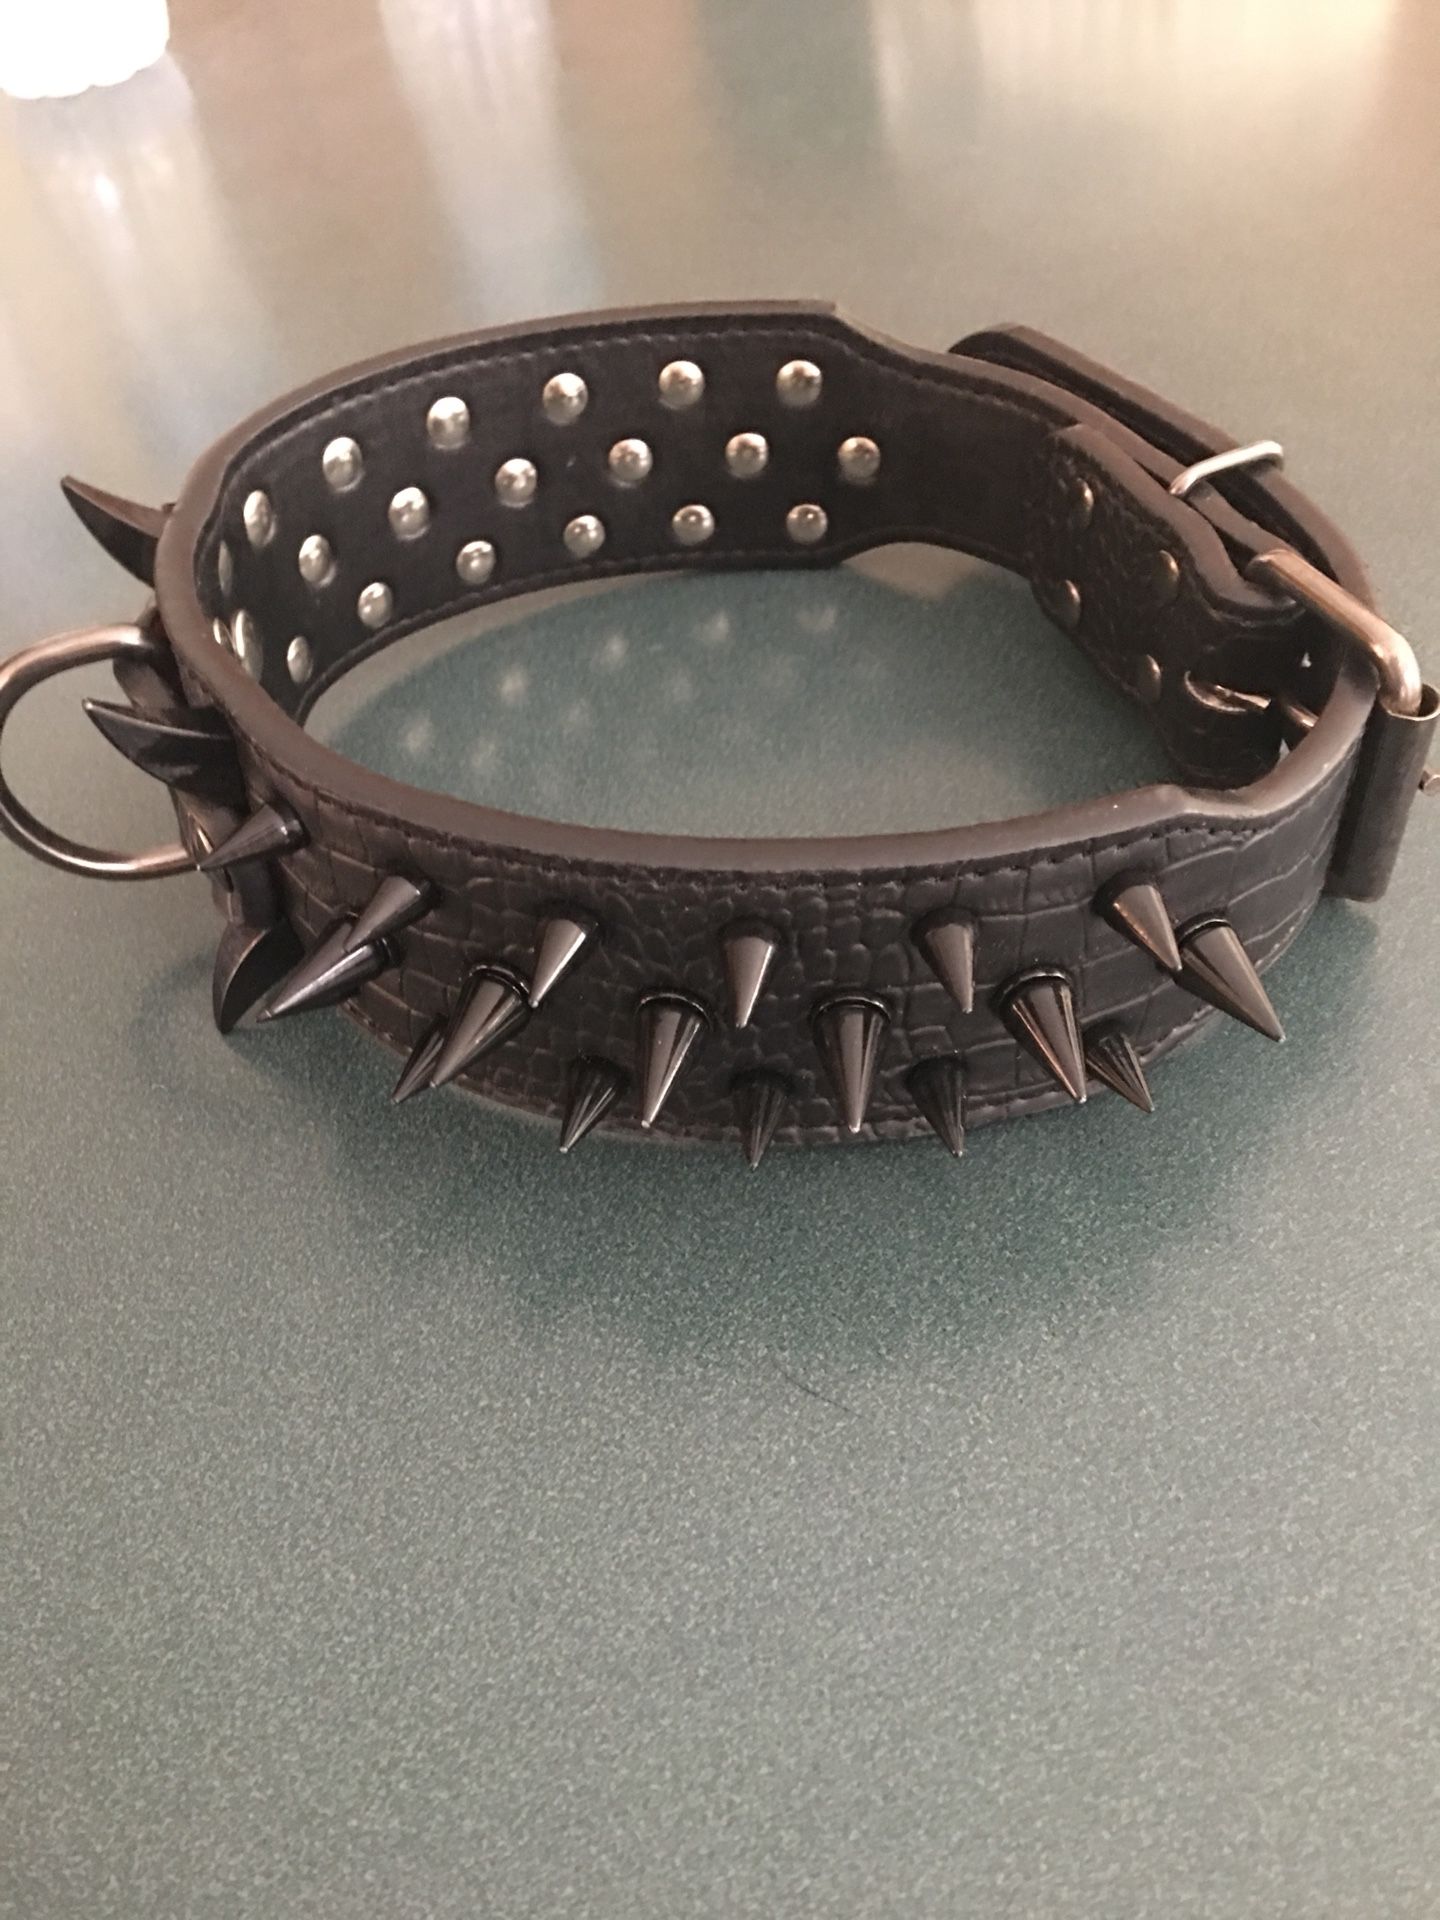 Brand new Black, all leather. L Spiked dog collar